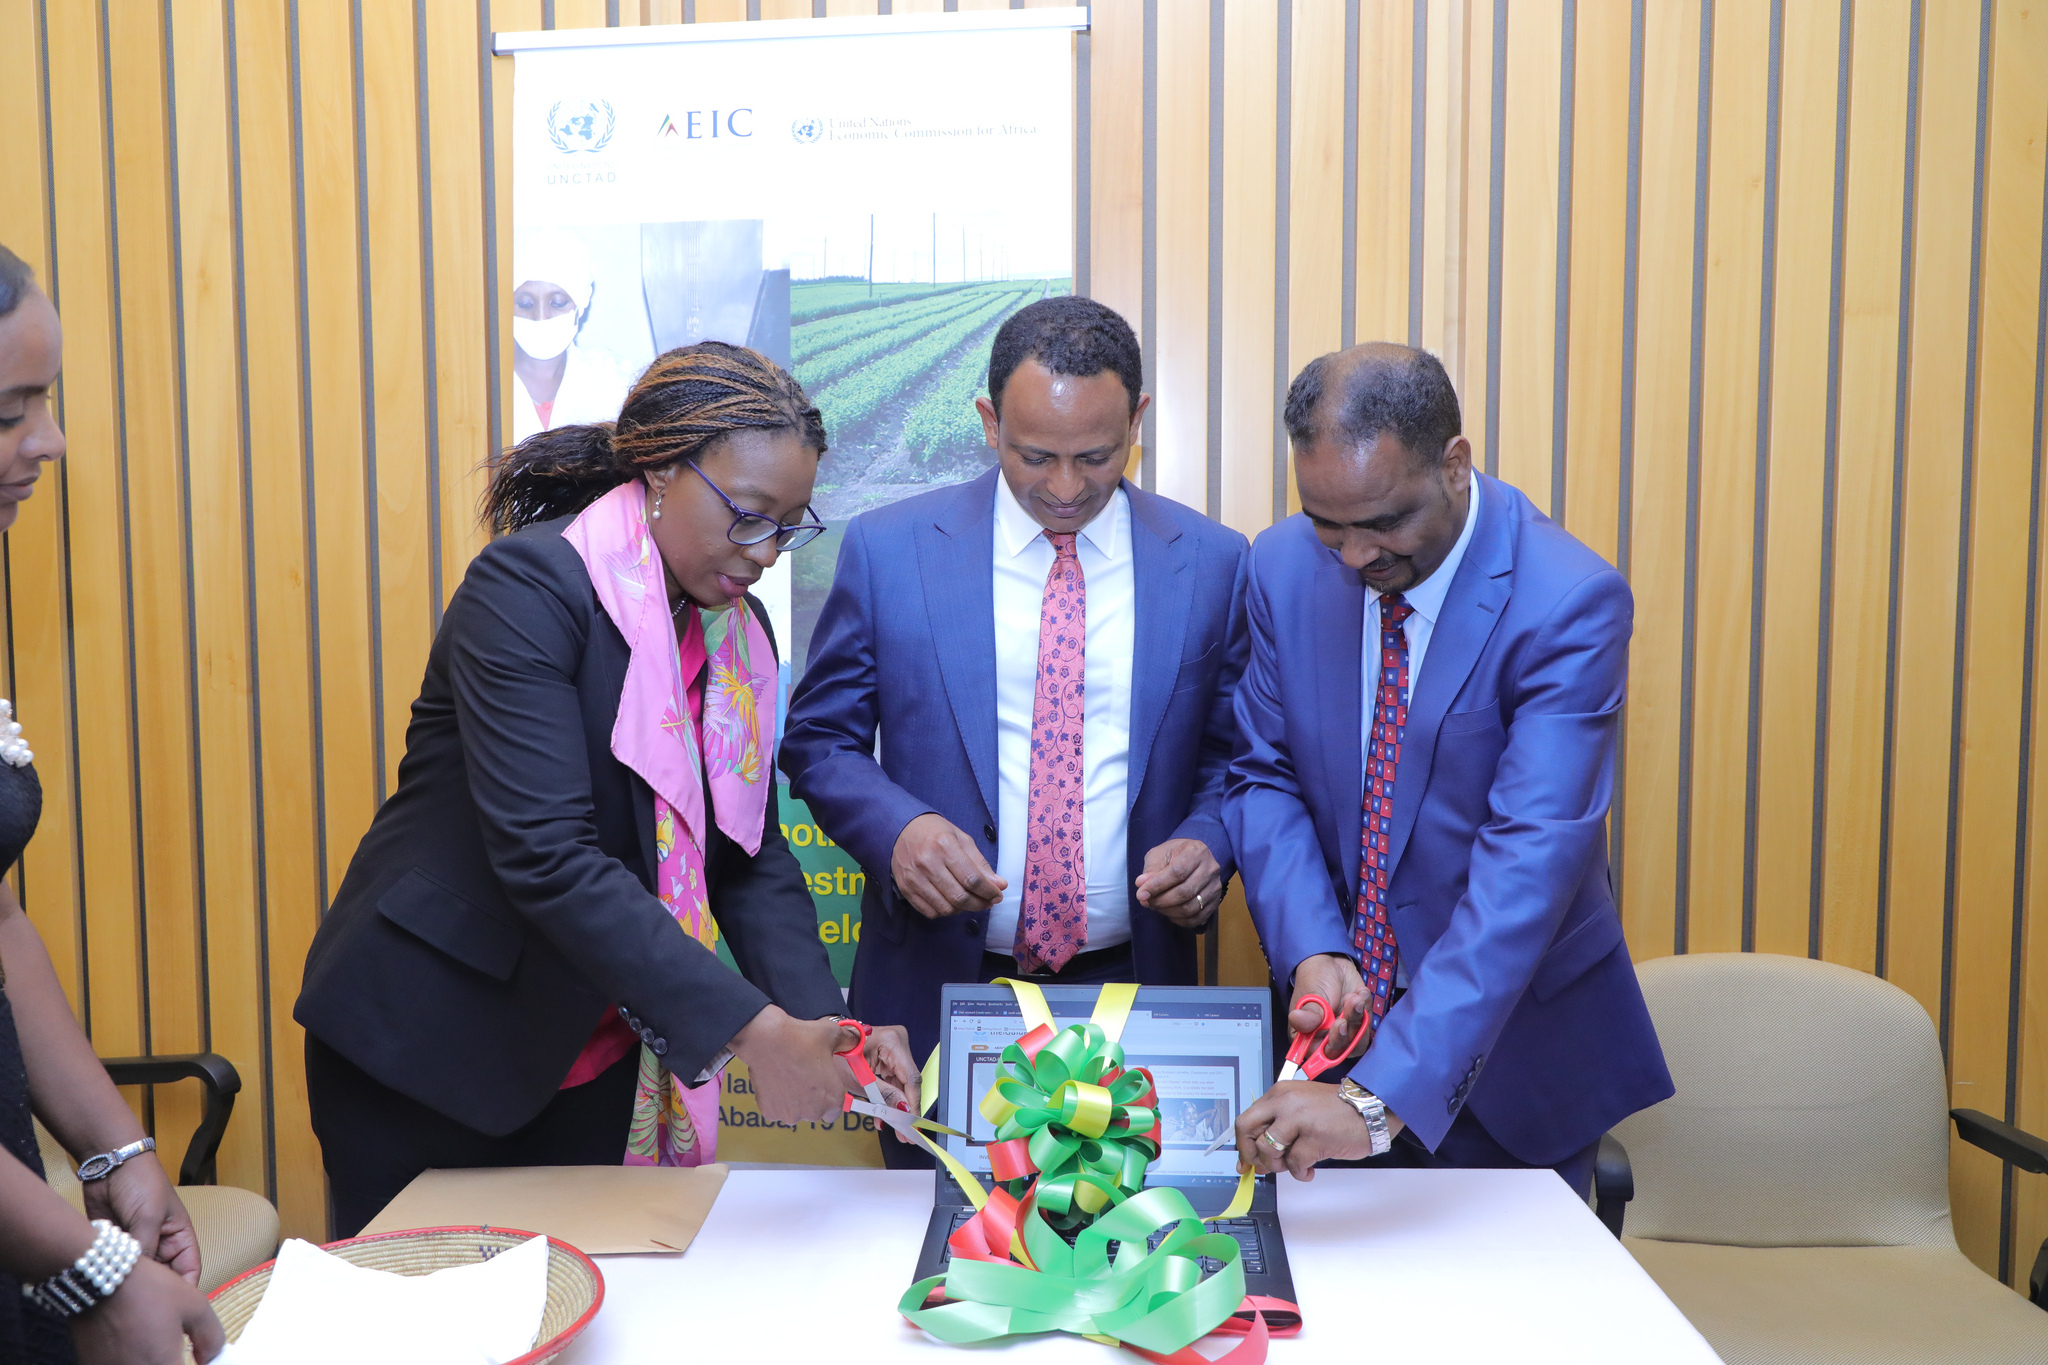 Ethiopia’s digital platform guiding investors to the country launched in Addis Ababa